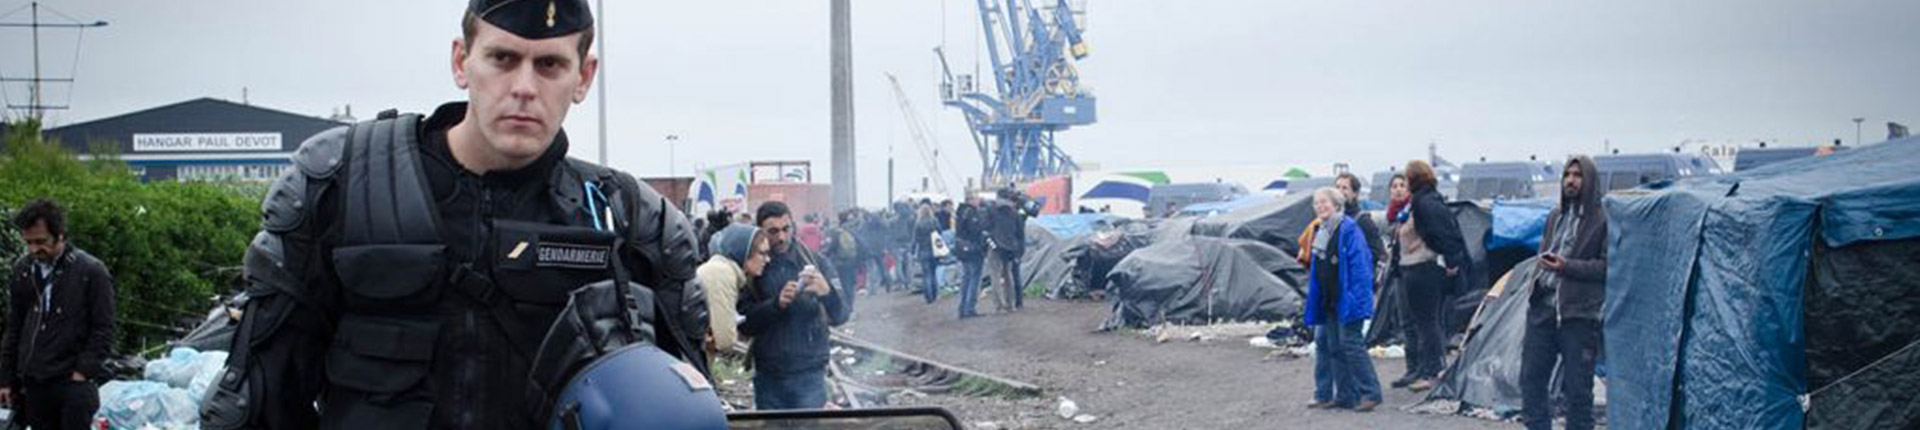 Riot police and protesters at a refugee camp